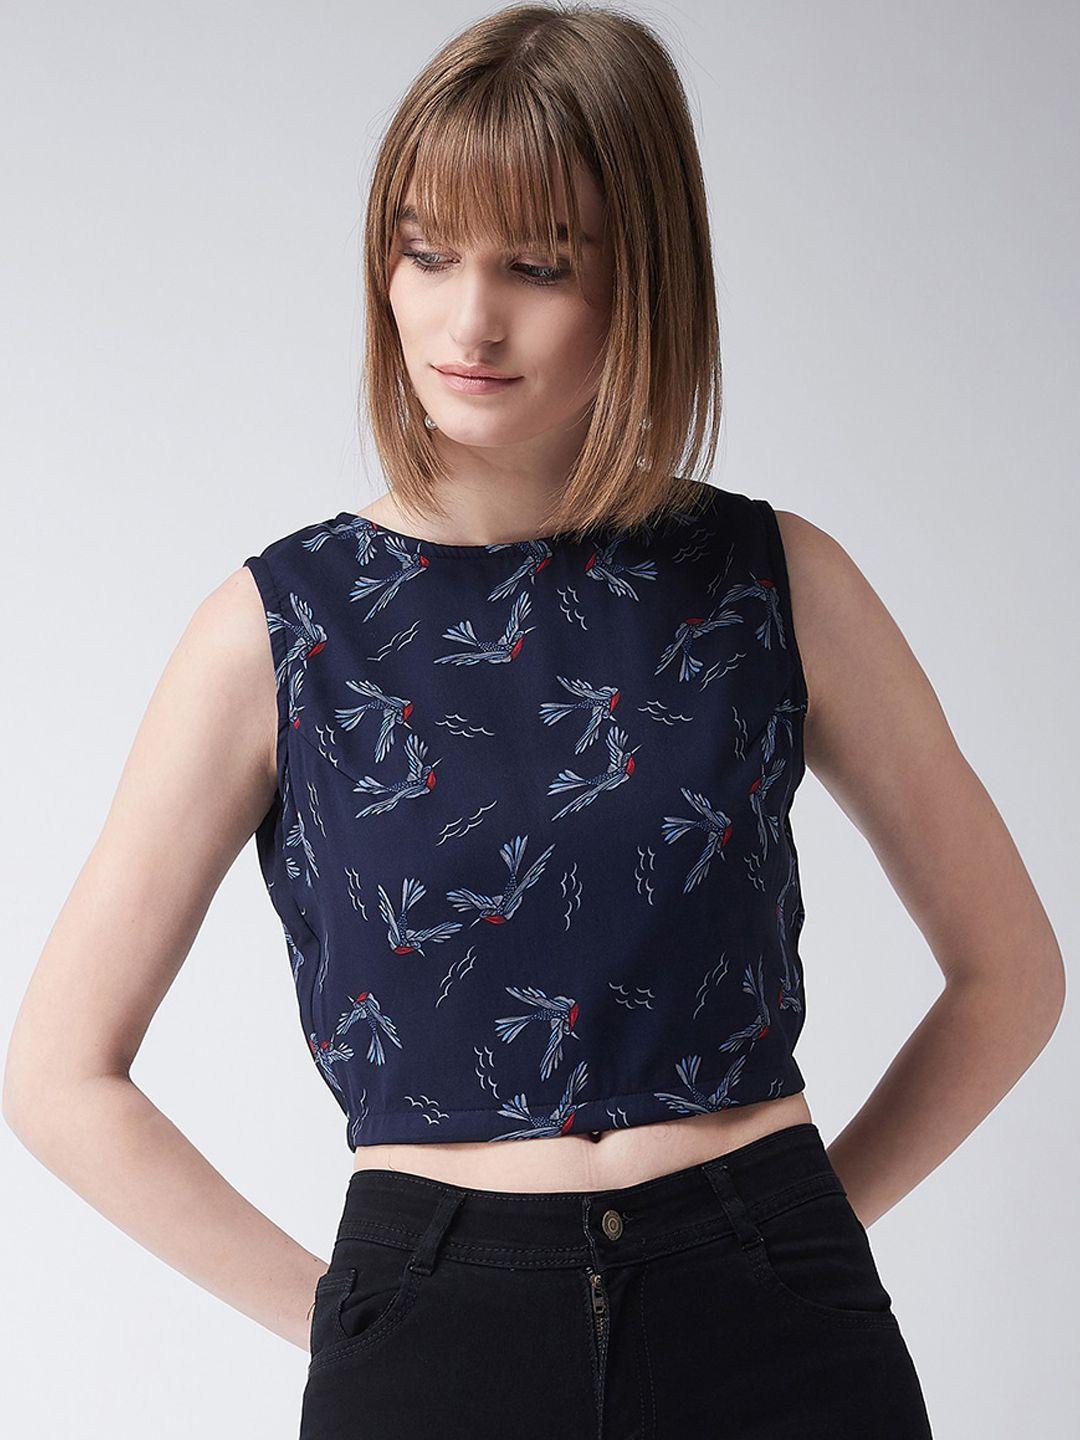 miss-chase-women-navy-blue-printed-top